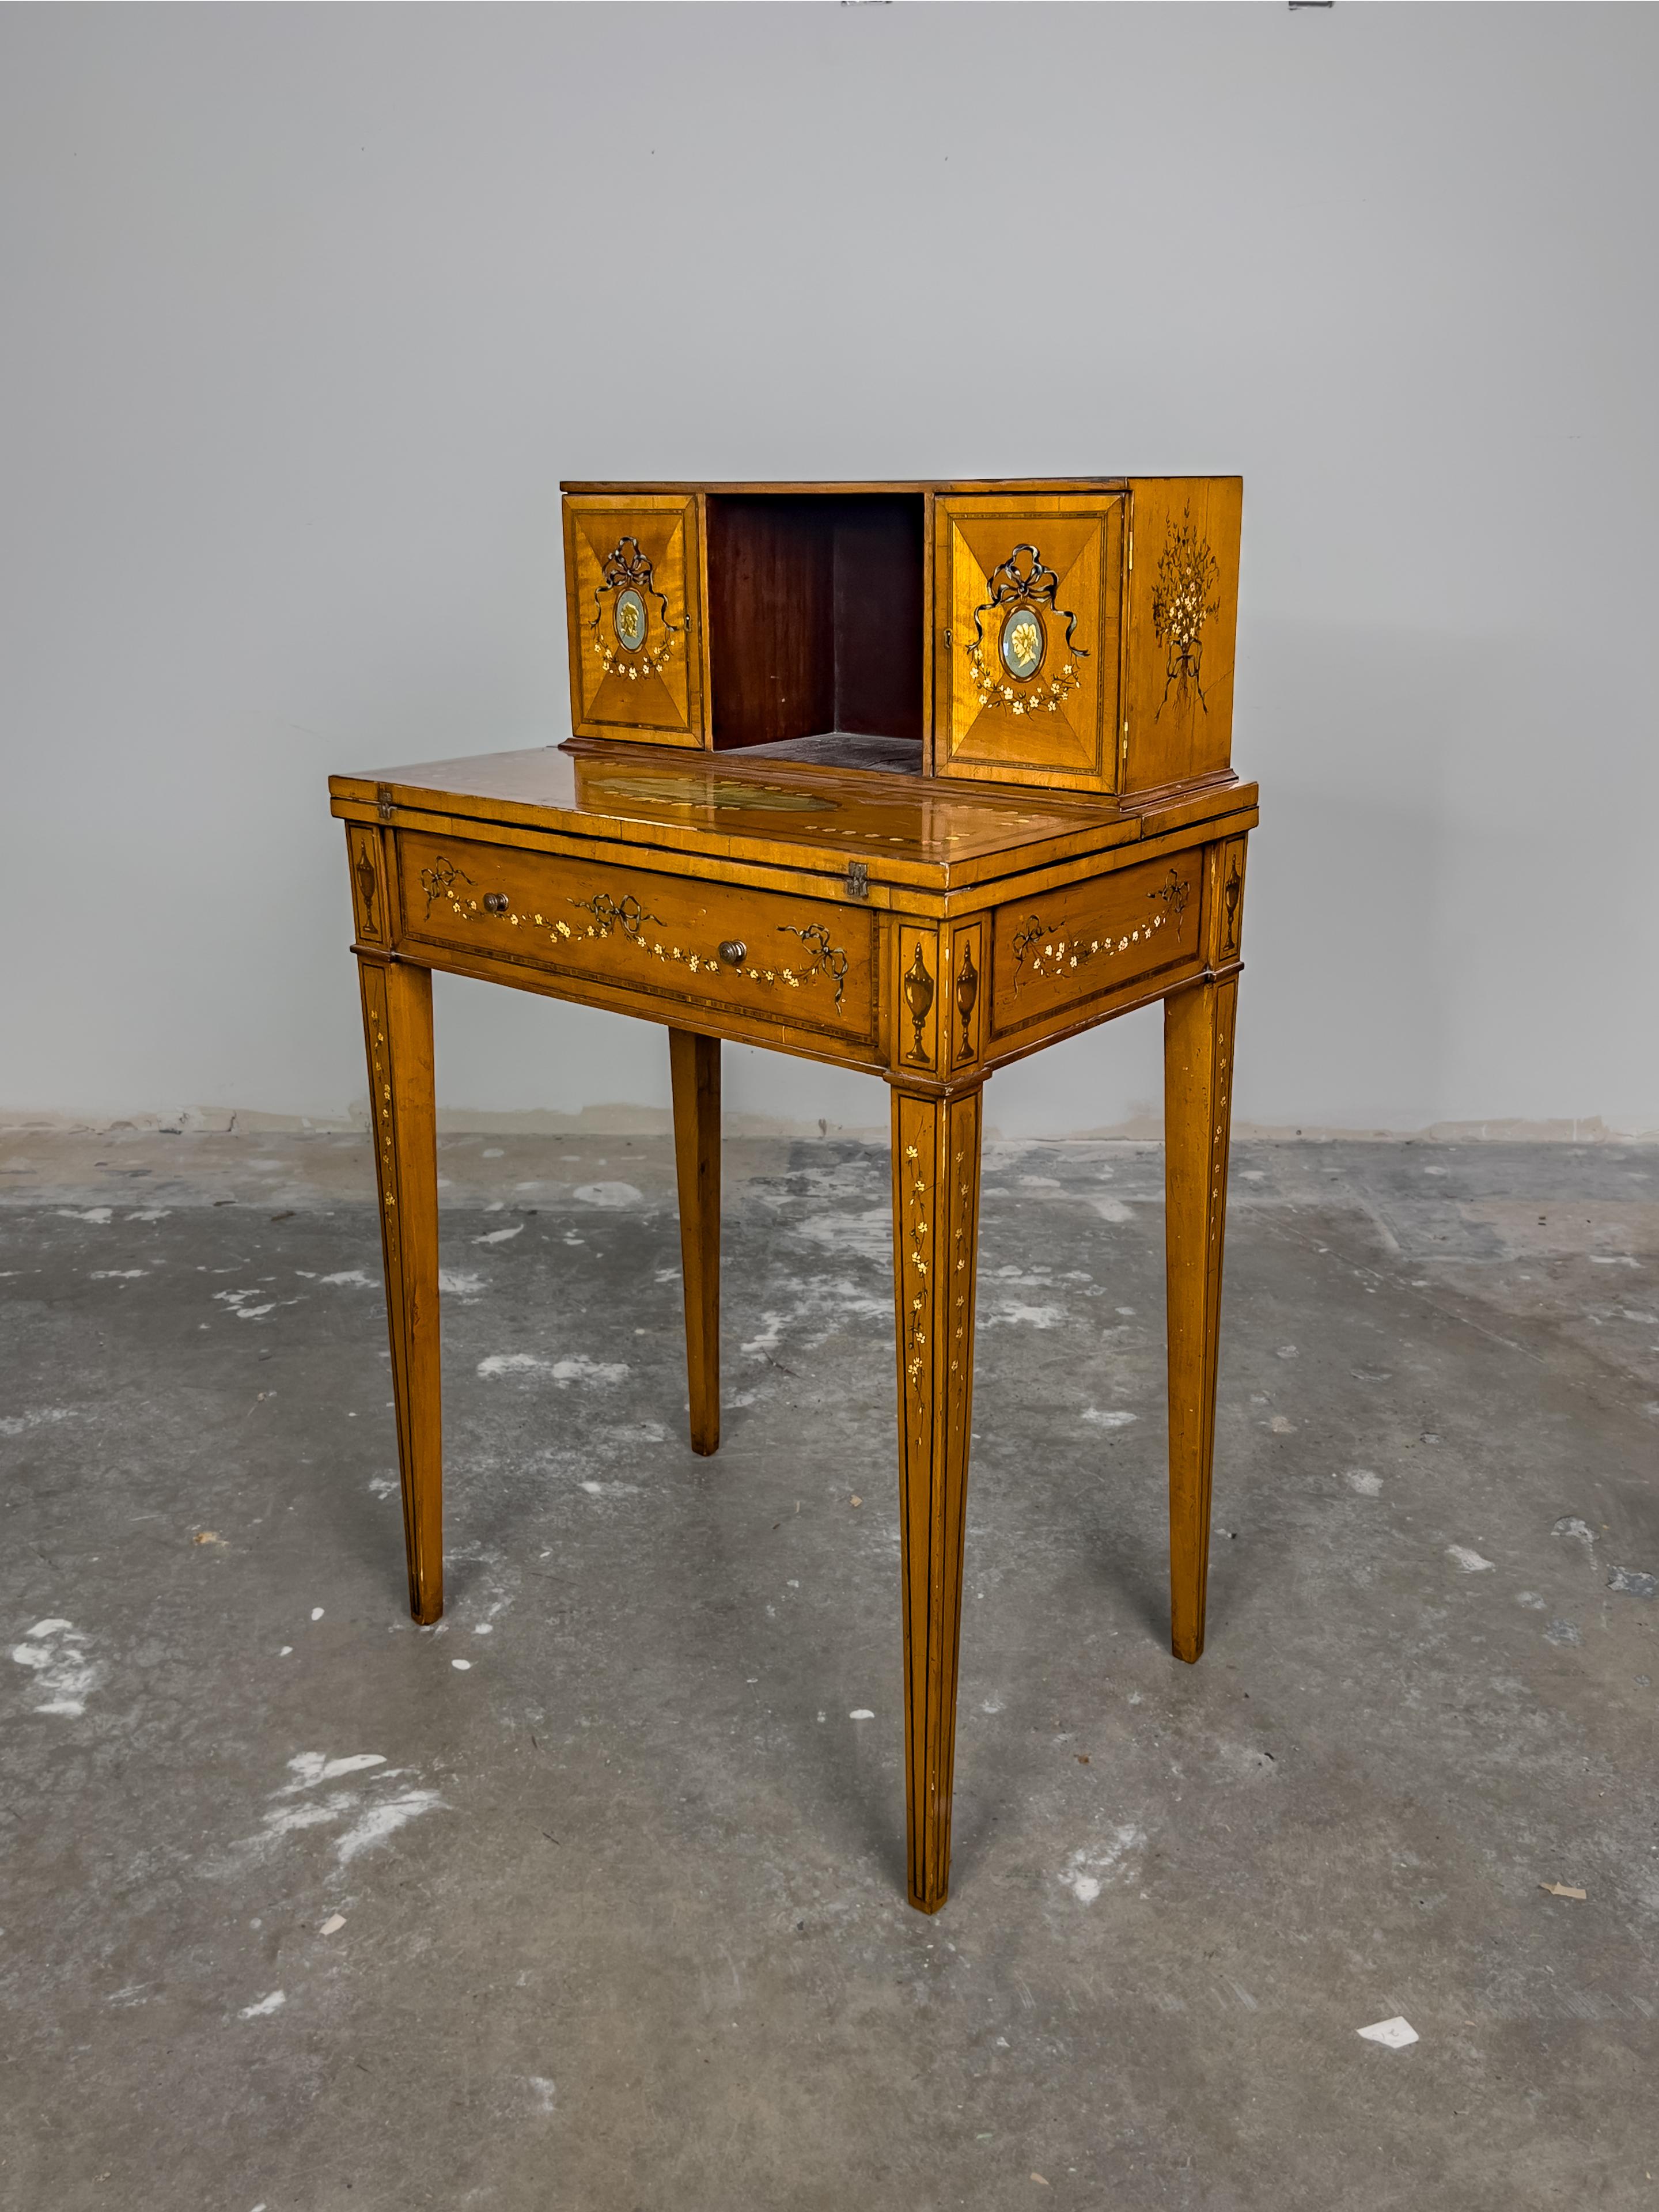 Vintage Inlay and Hand Painted Desk with a fold front desk and superstructure with cabinets doors and concealed drawers. The painted detail is typical of the neoclassical Adams style decoration.